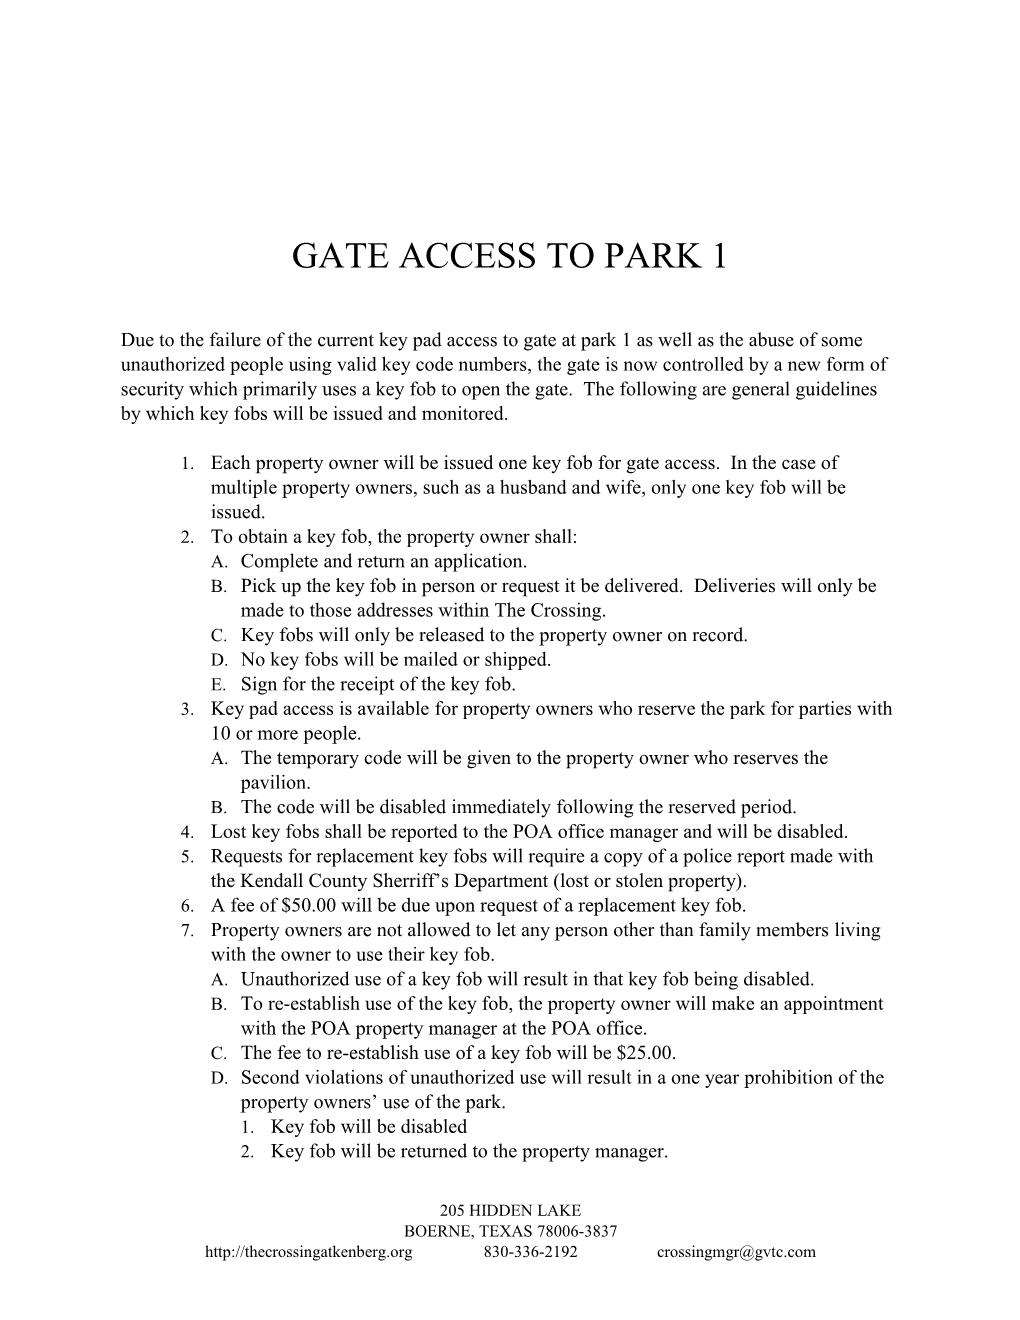 Gate Access to Park 1